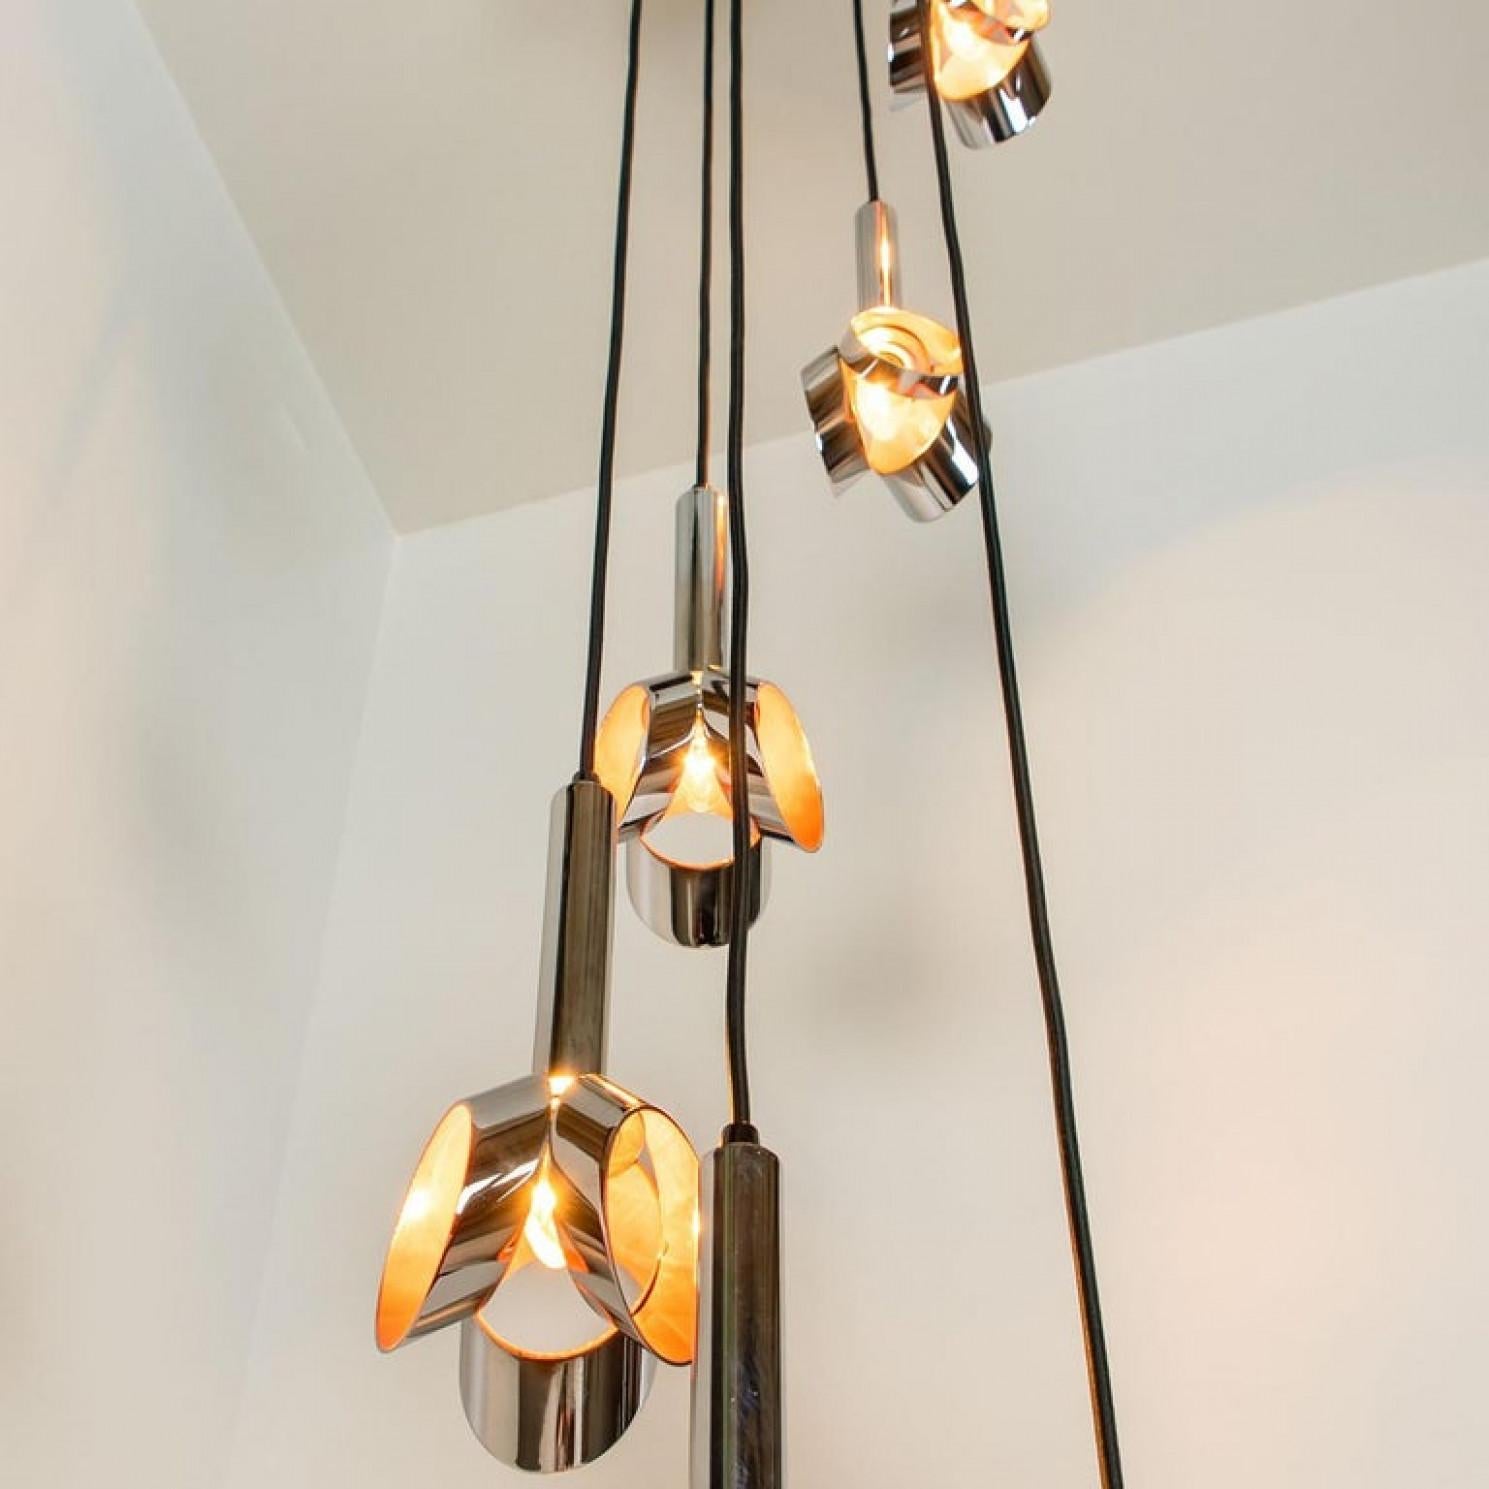 Cascade Fixture with Six Chrome and Orange Pendants in RAAK Style, 1970s For Sale 4